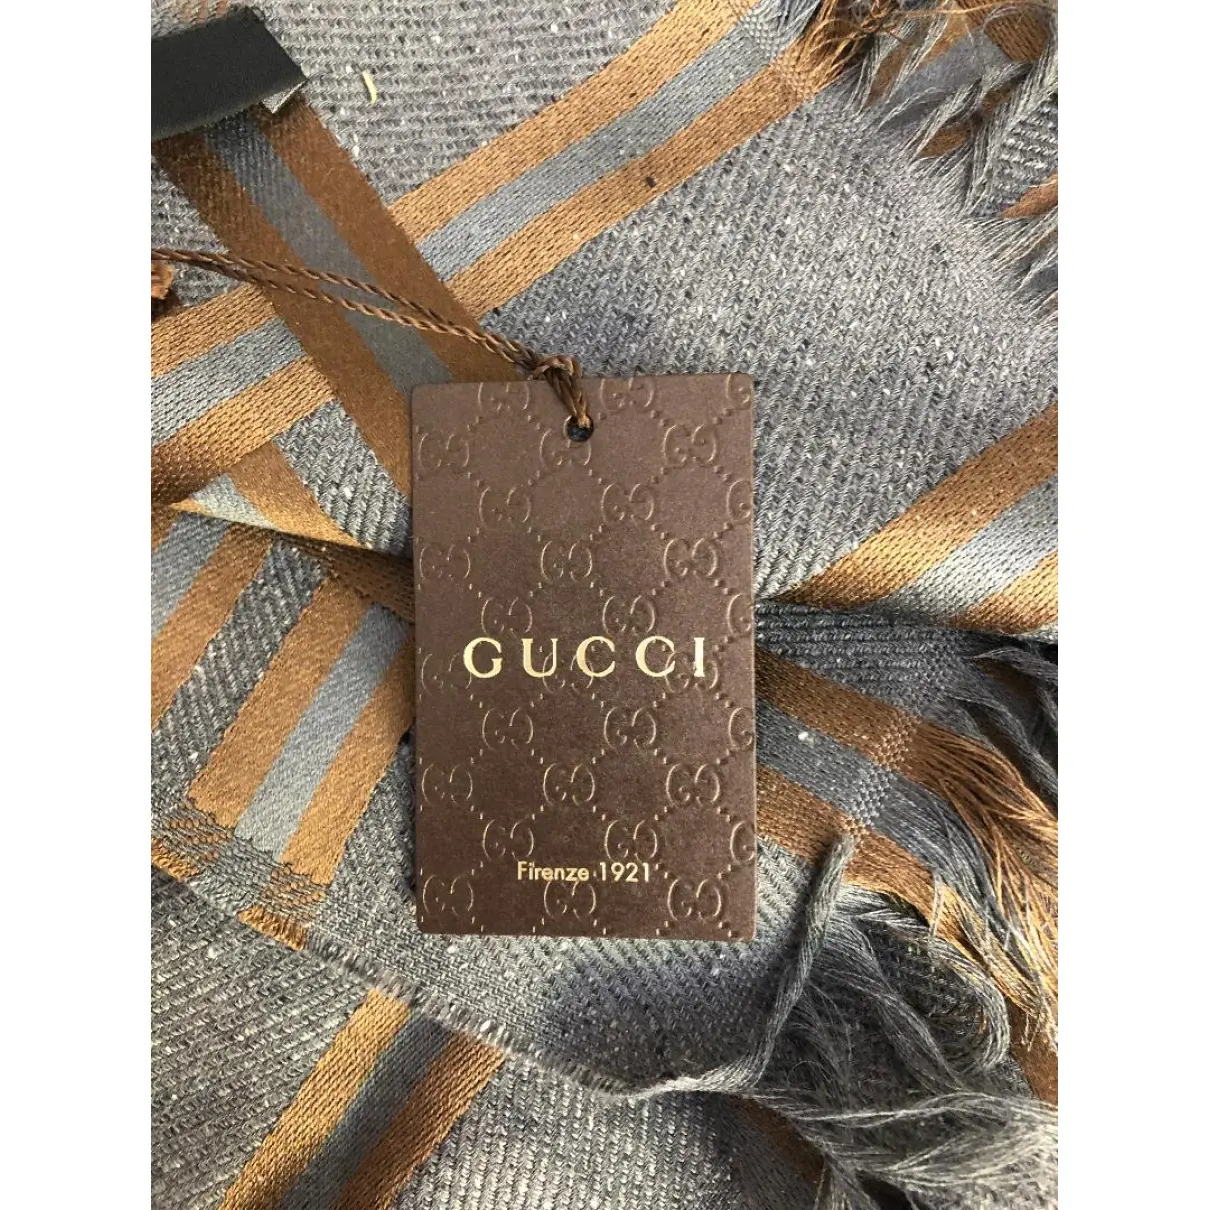 Buy Gucci Wool scarf & pocket square online